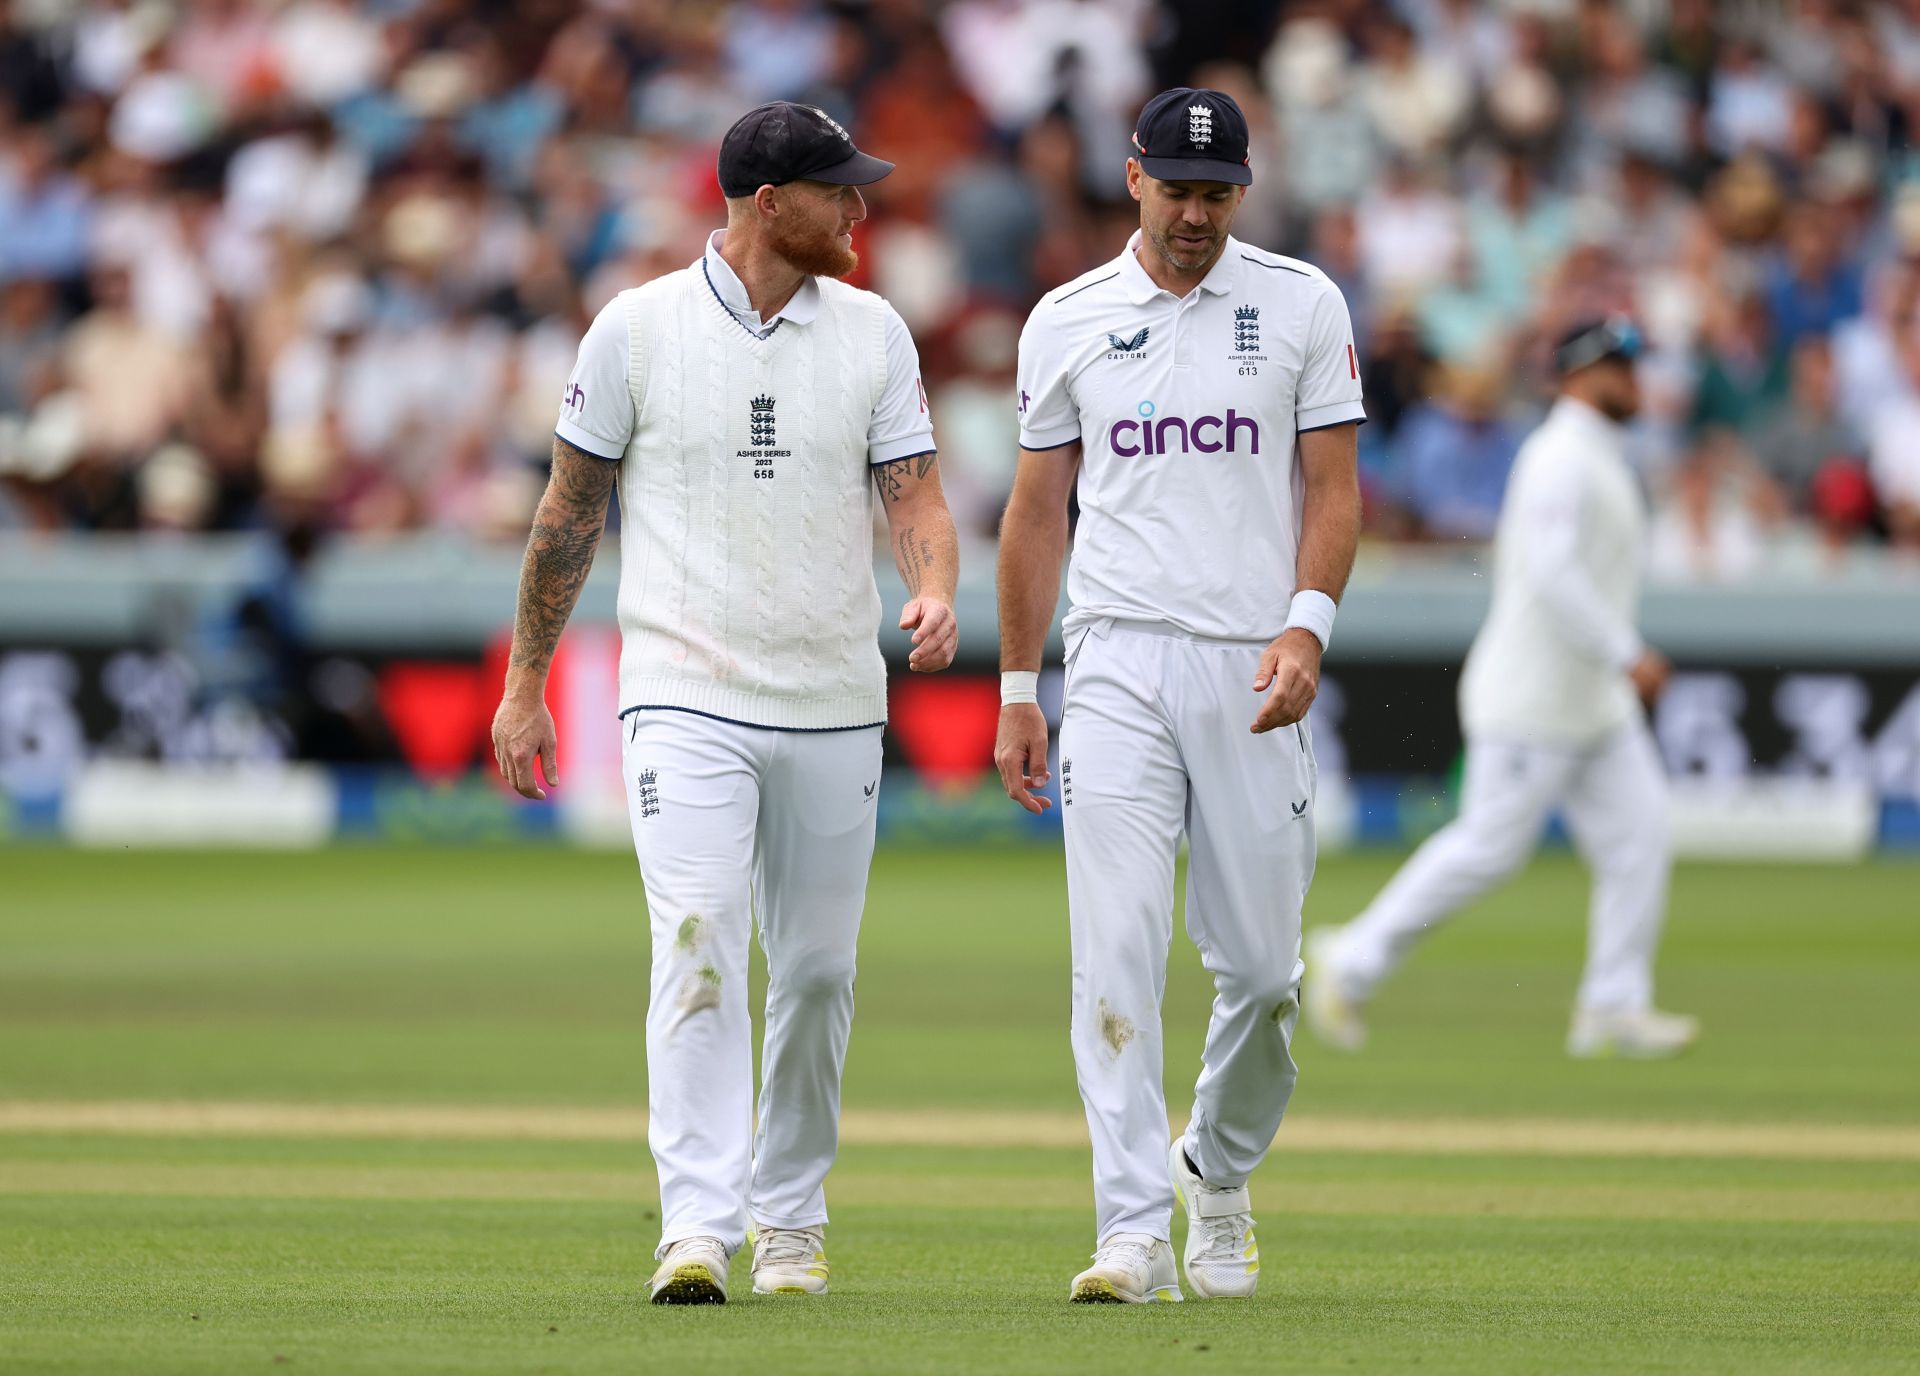 Ben Stokes and James Anderson. (Credits: Getty)